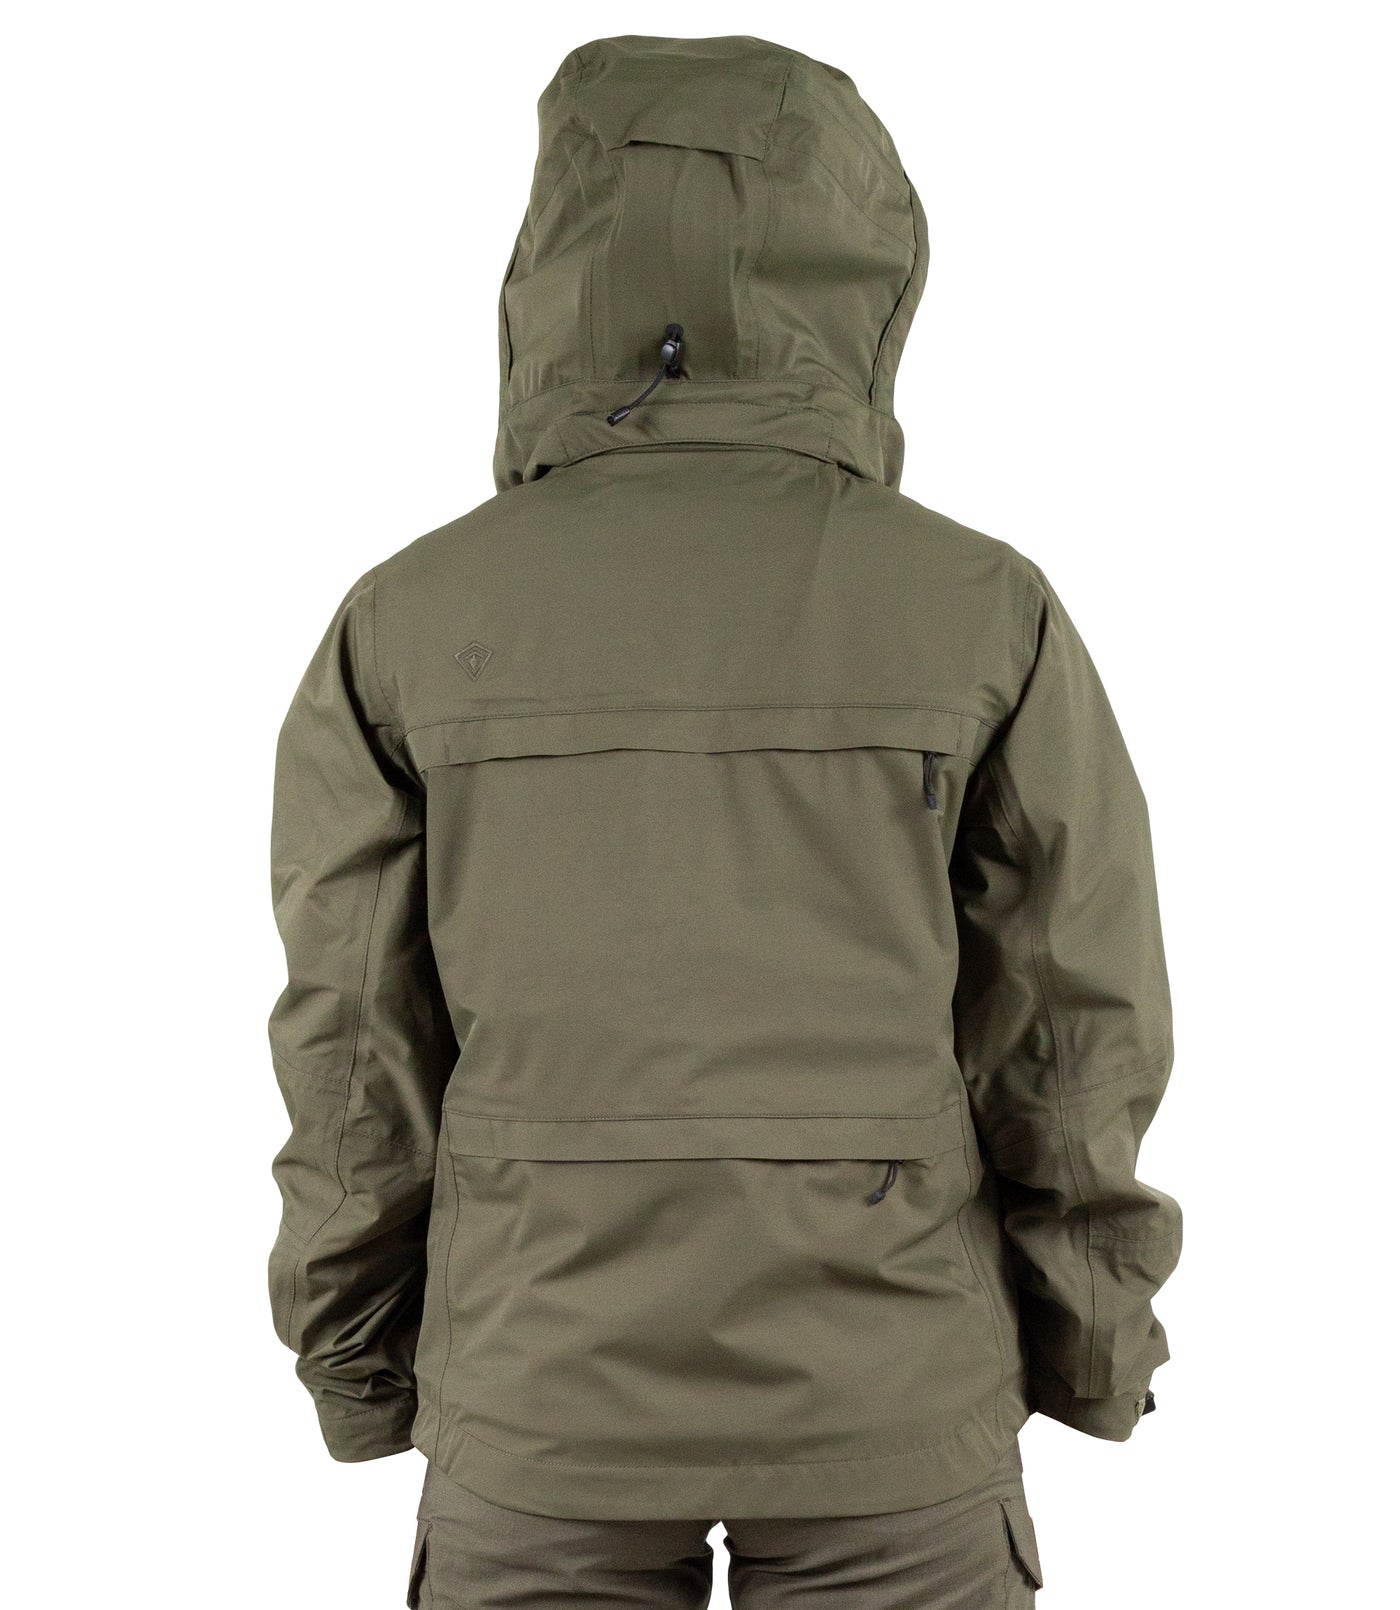 Back Hood of Women’s Tactix System Jacket in OD Green